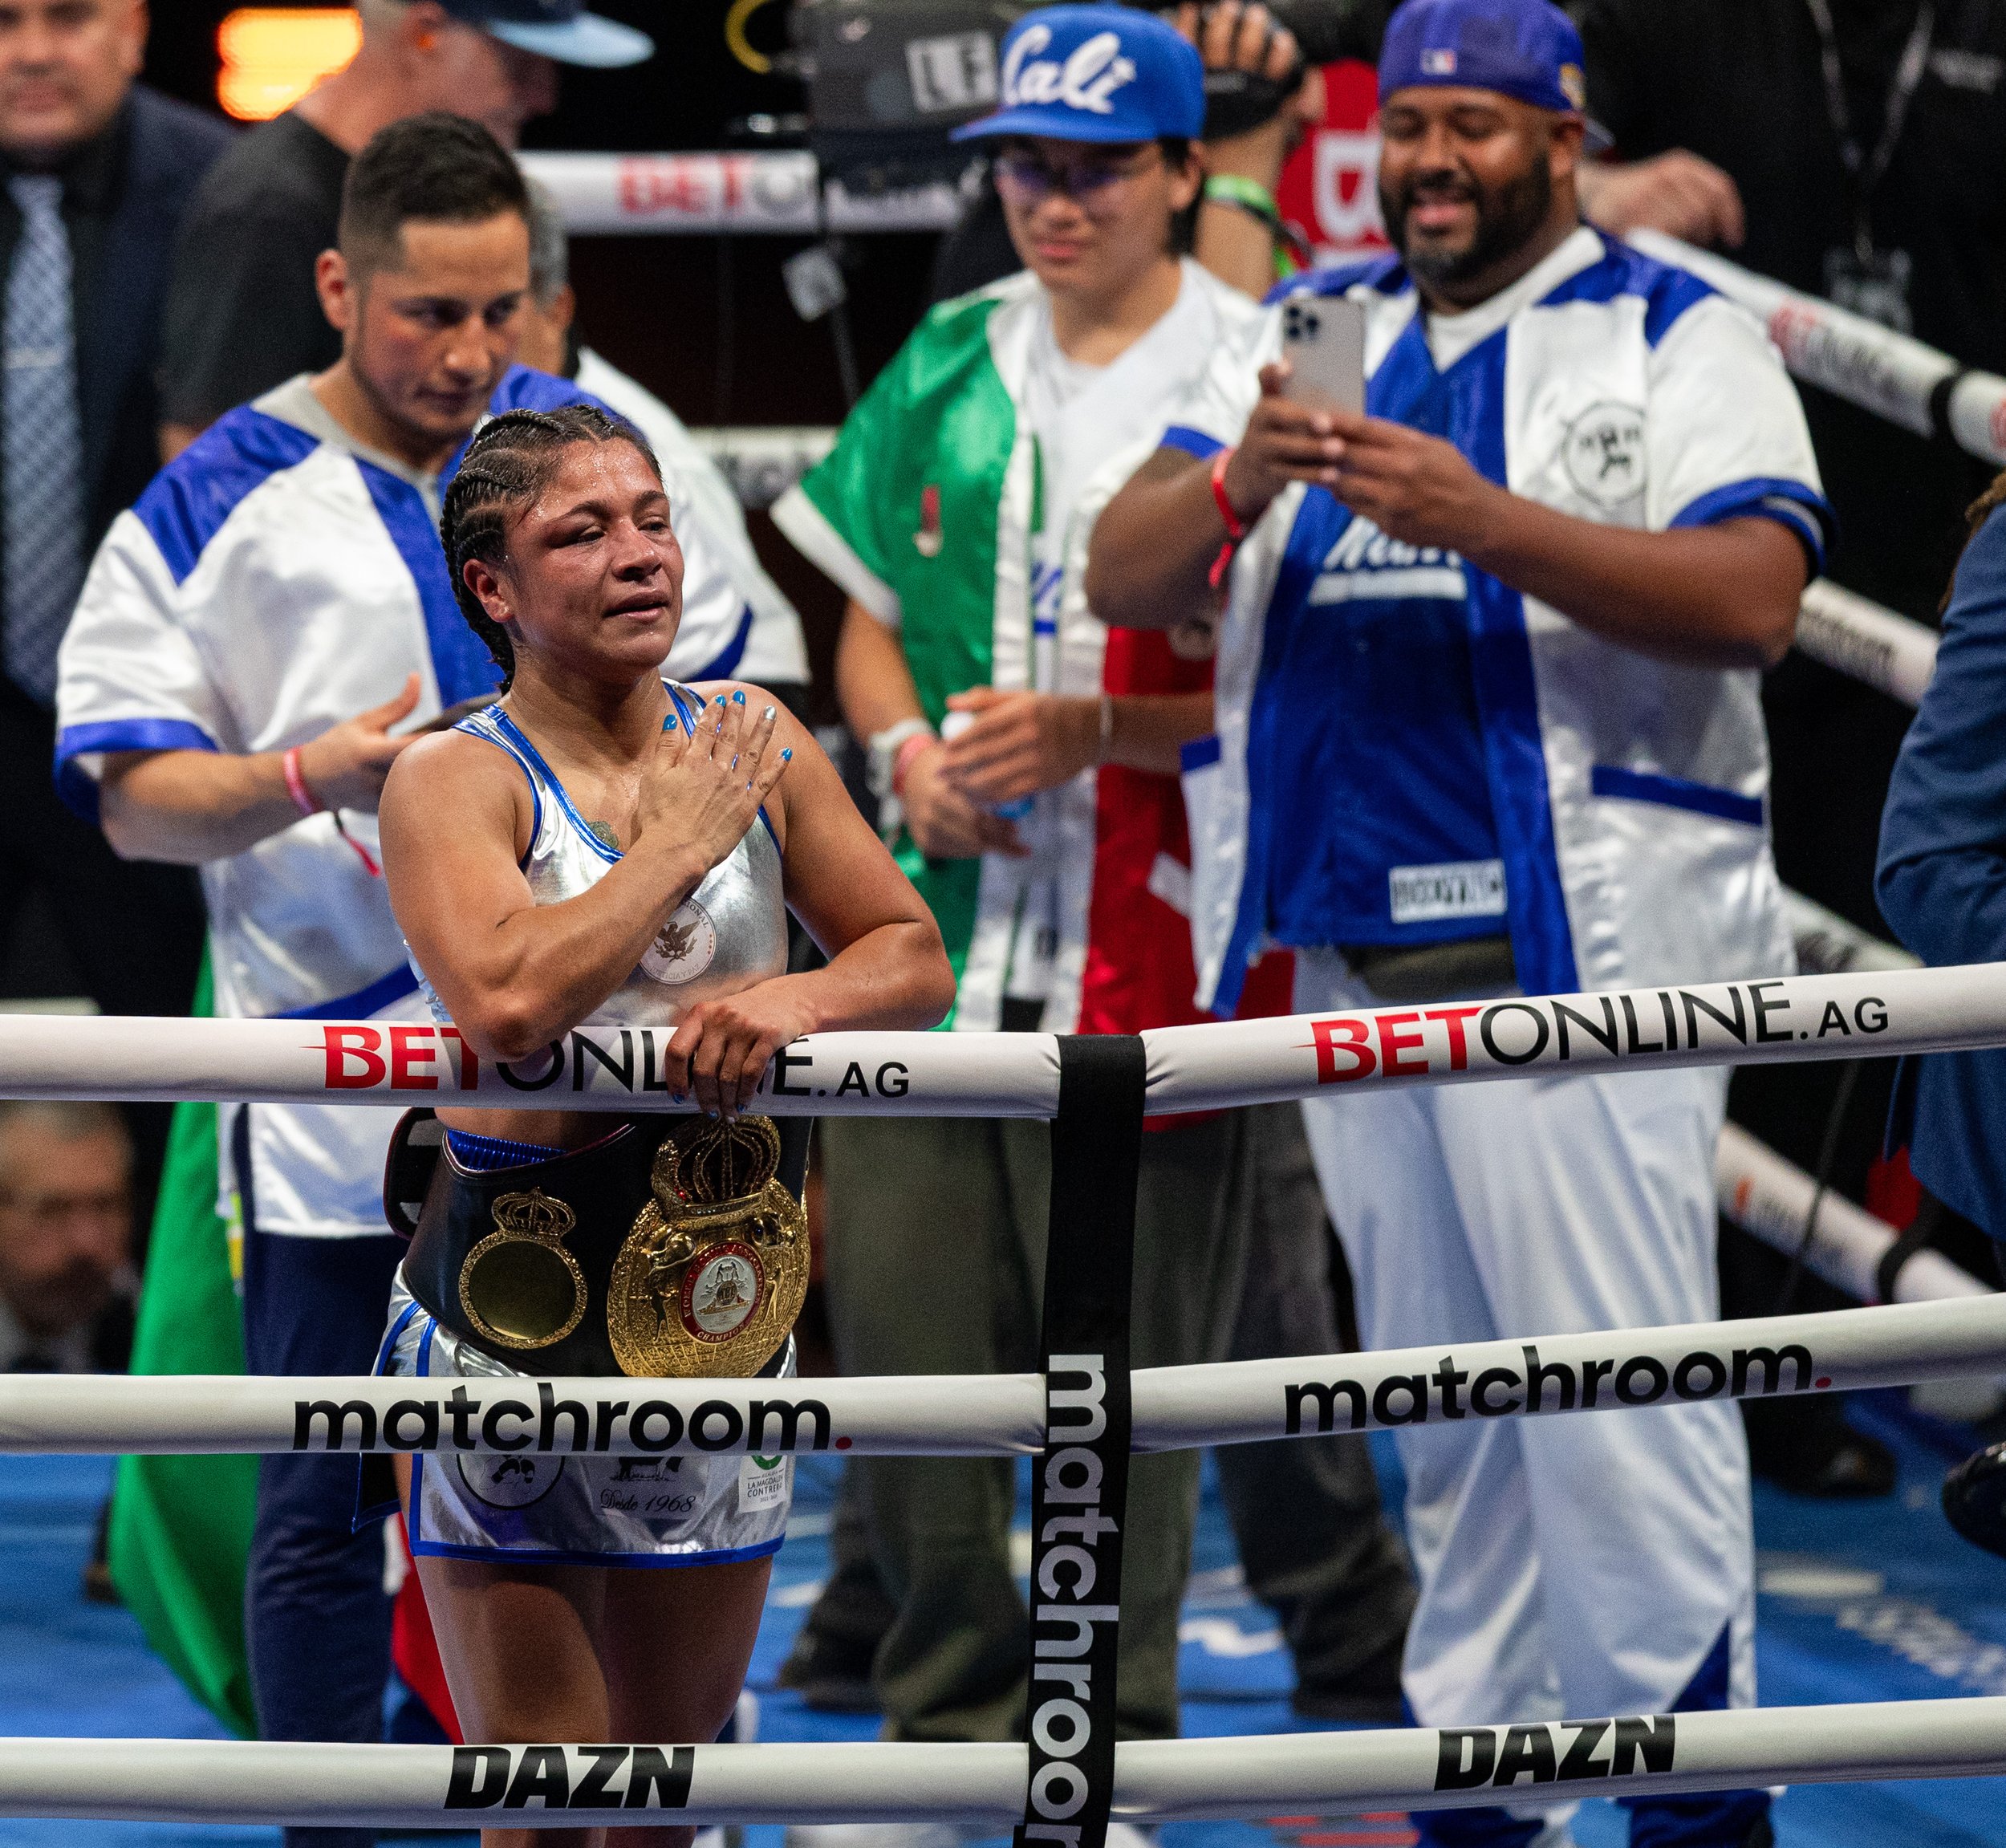  Erika Cruz thanking the crowd for their support after dethroning Mayerlin Rivas of the WBA World Super-Bantamweight title in YouTube Theater at Inglewood, Calif. on Saturday, Nov. 18. (Danilo Perez | The Corsair) 